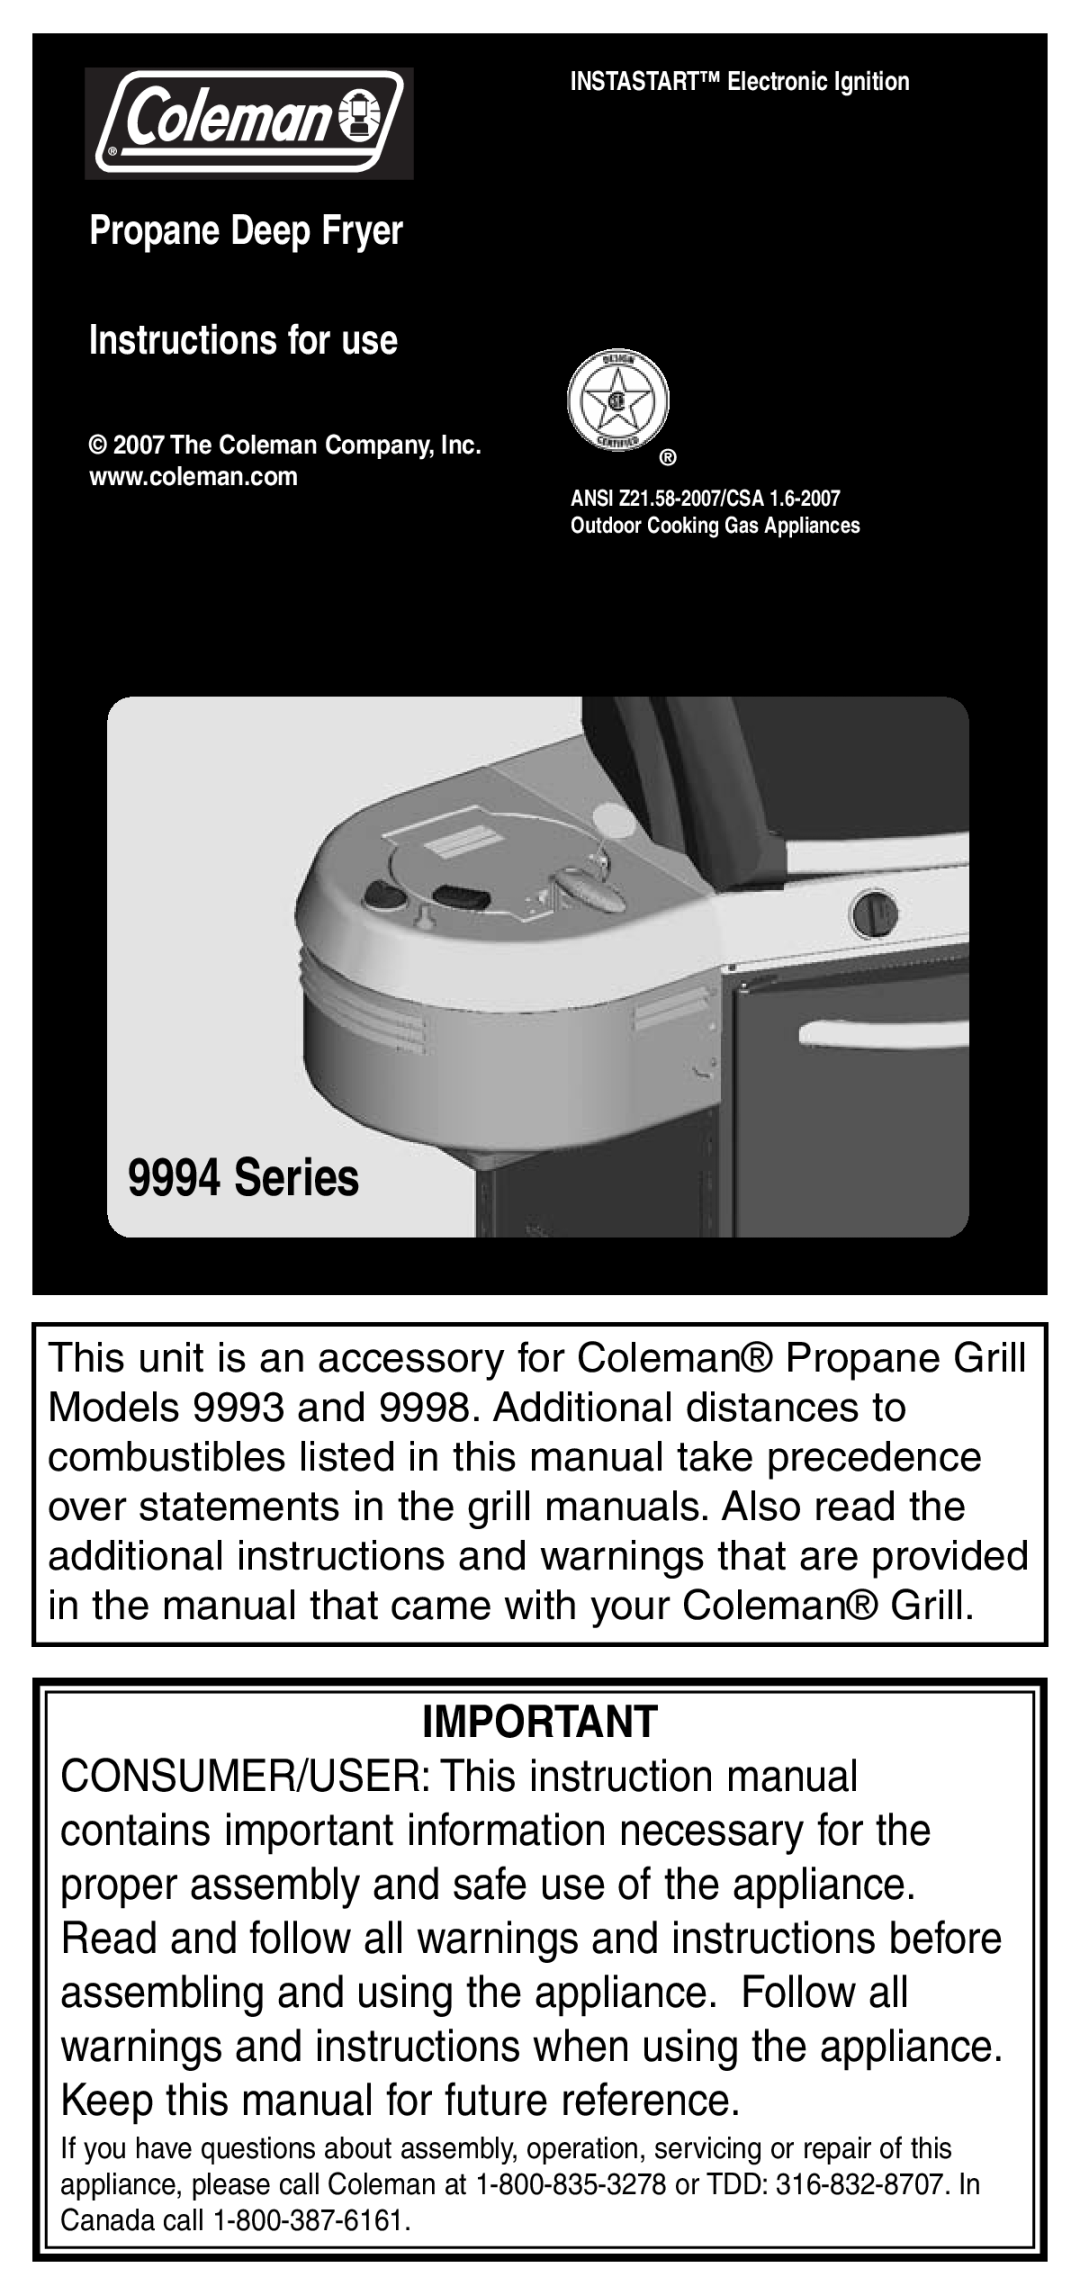 Coleman 9994 instruction manual Series, Propane Deep Fryer Instructions for use 